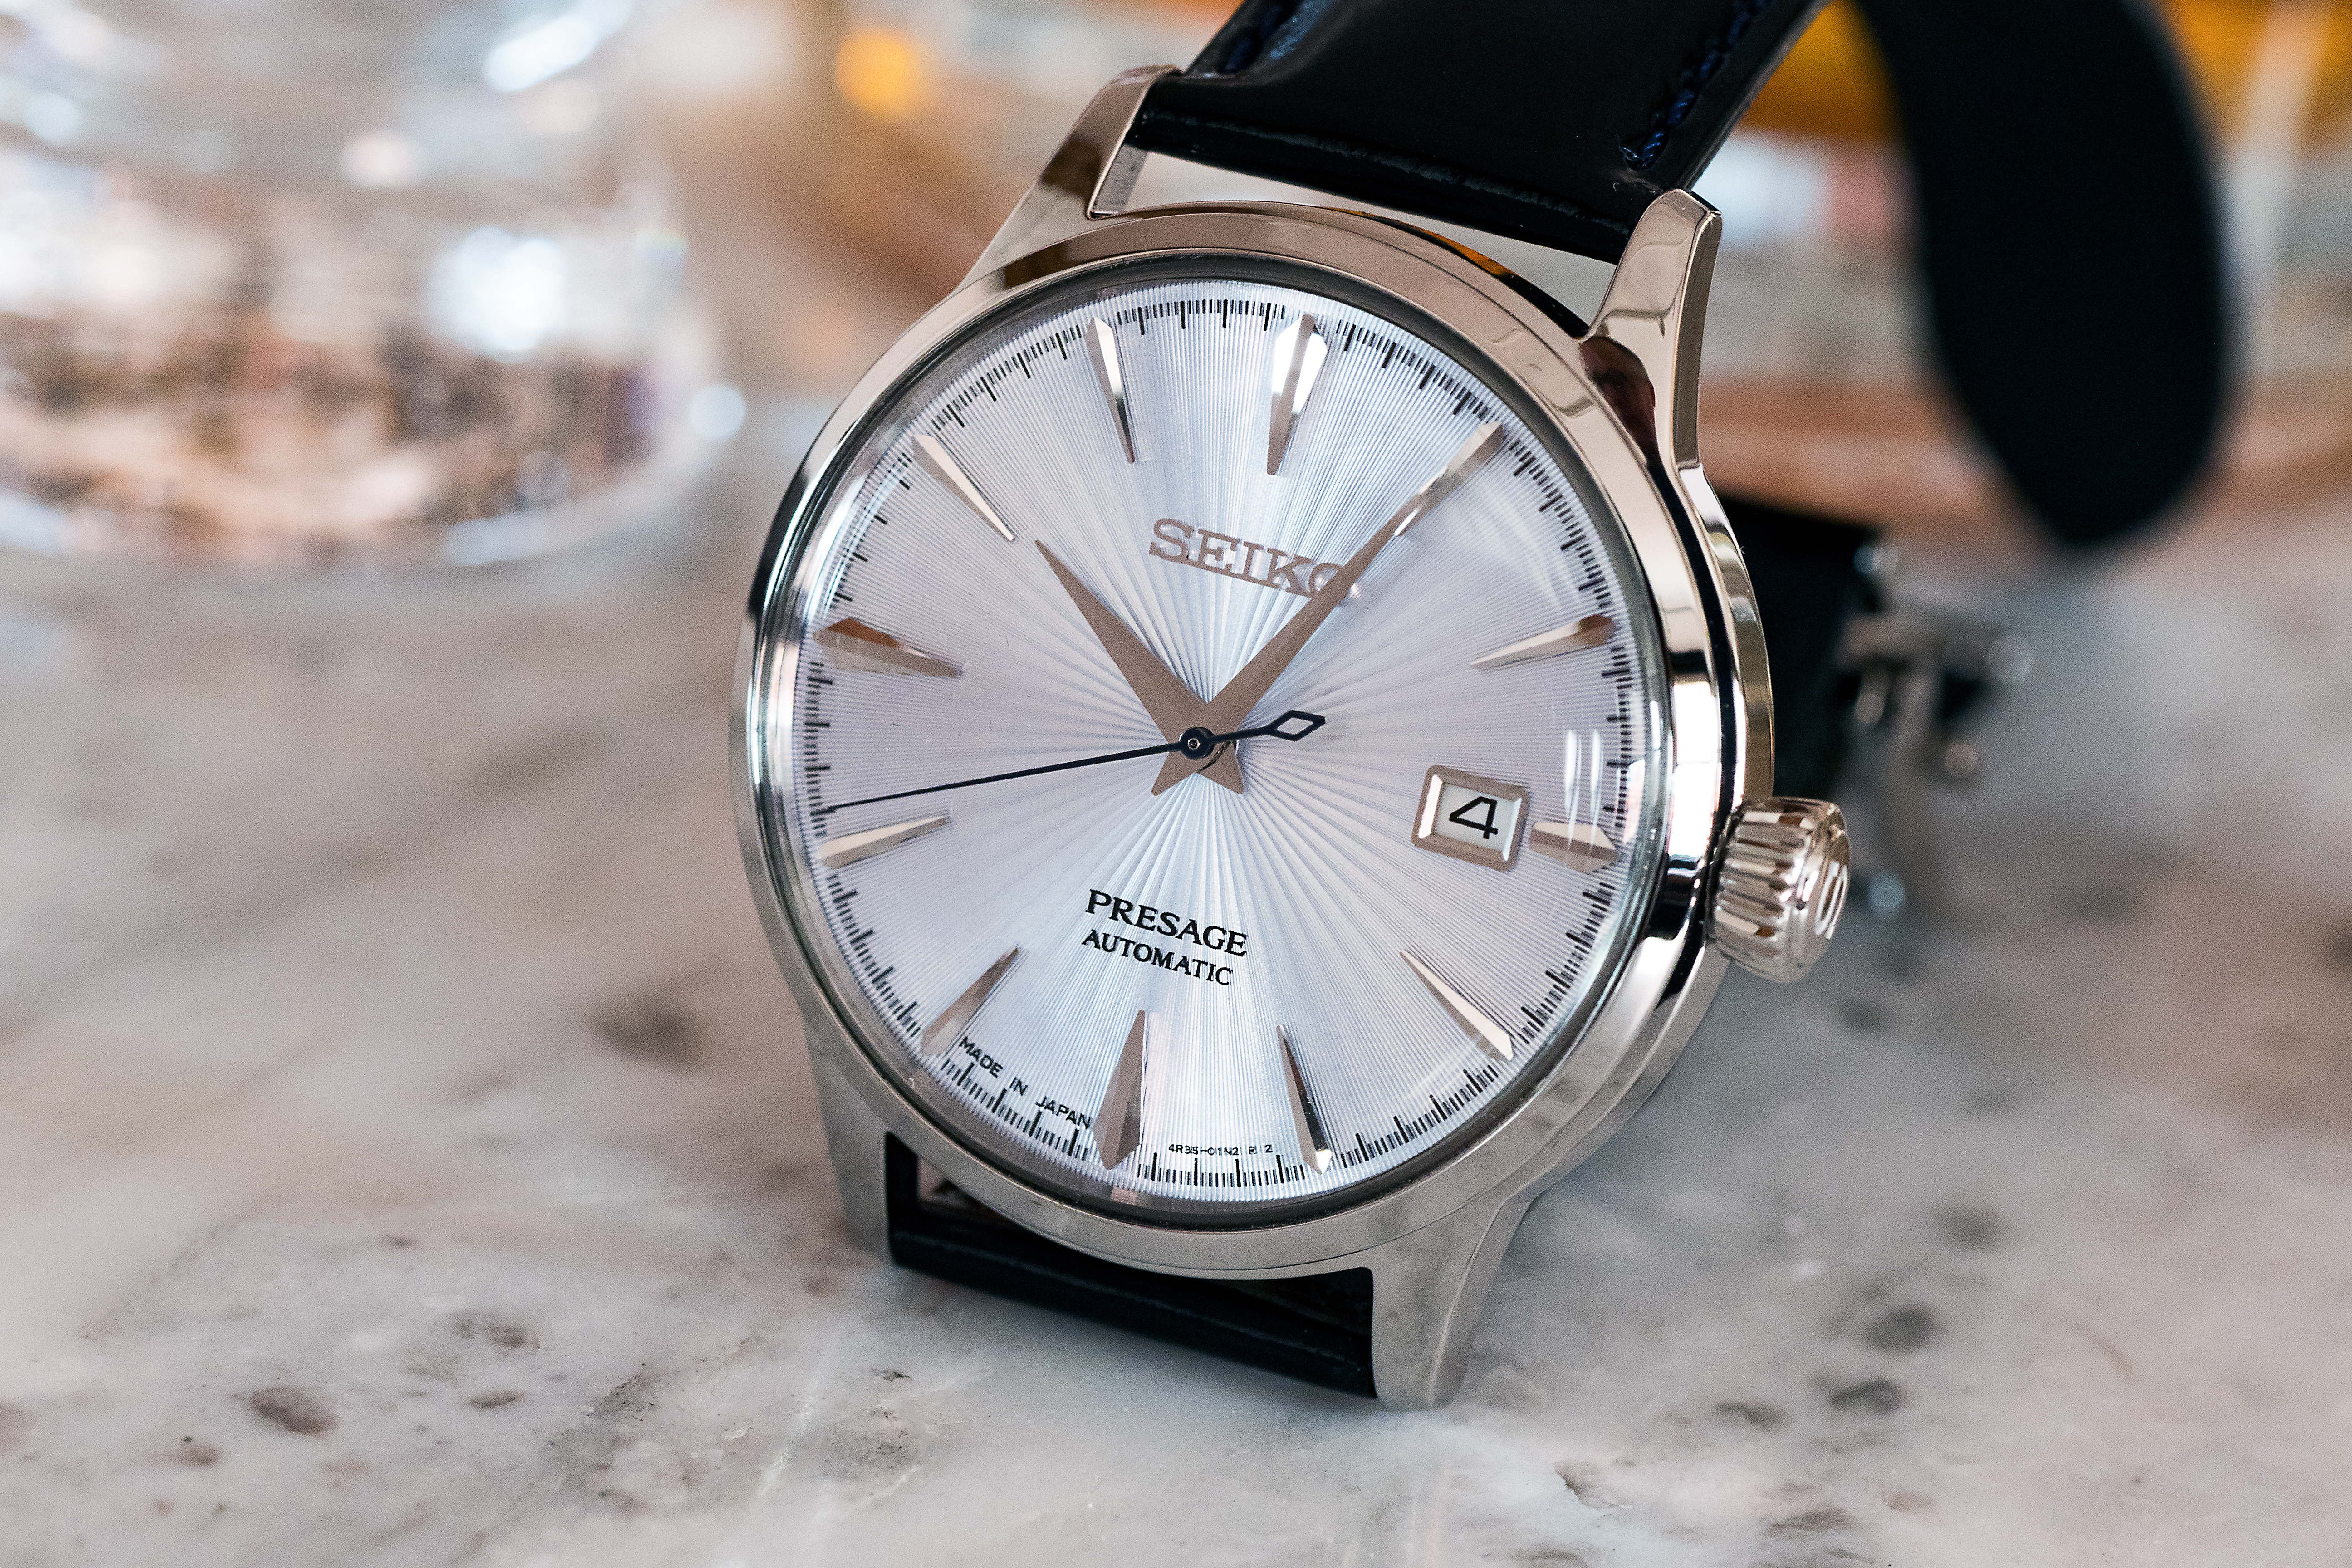 Hands-On: The Seiko Presage Cocktail Time SRPB43 - HODINKEE